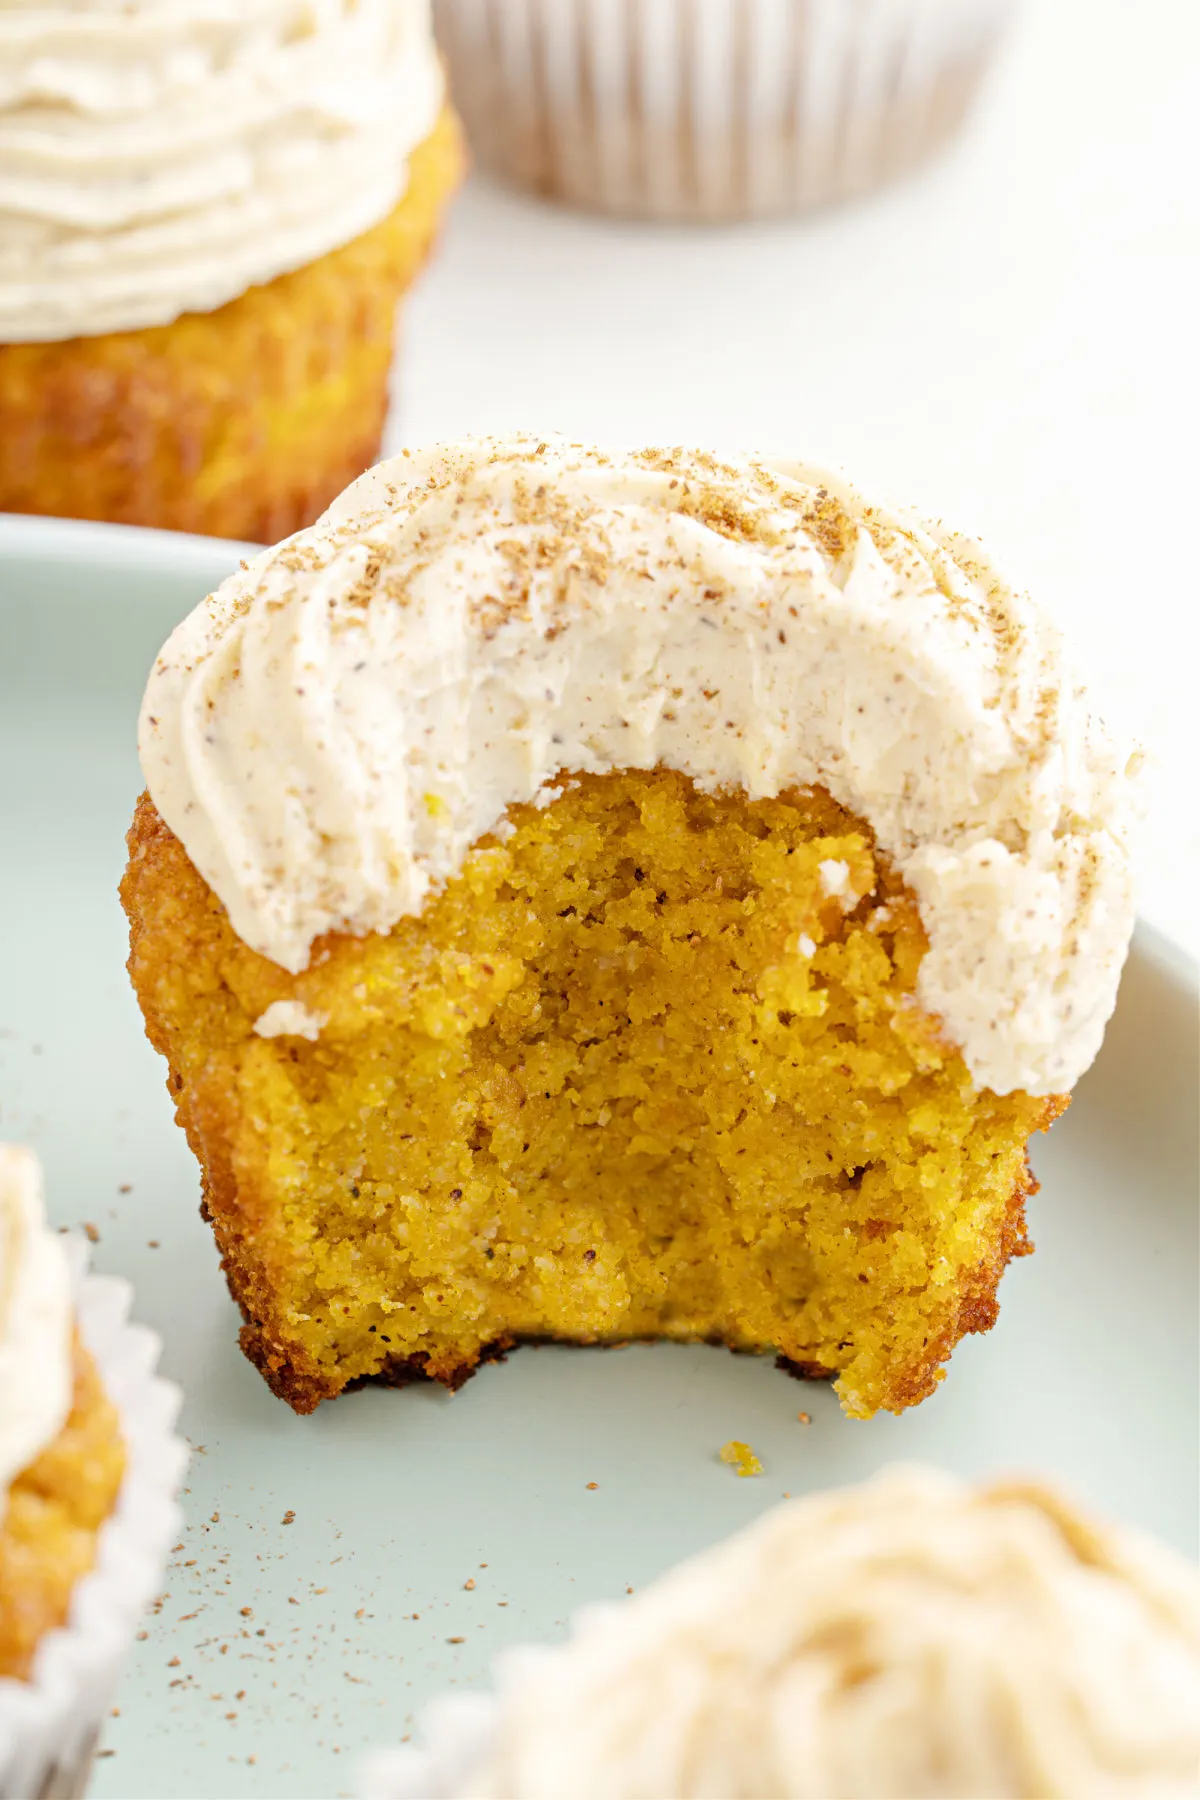 Pumpkin cupcake with cream cheese frosting and a bite taken out.